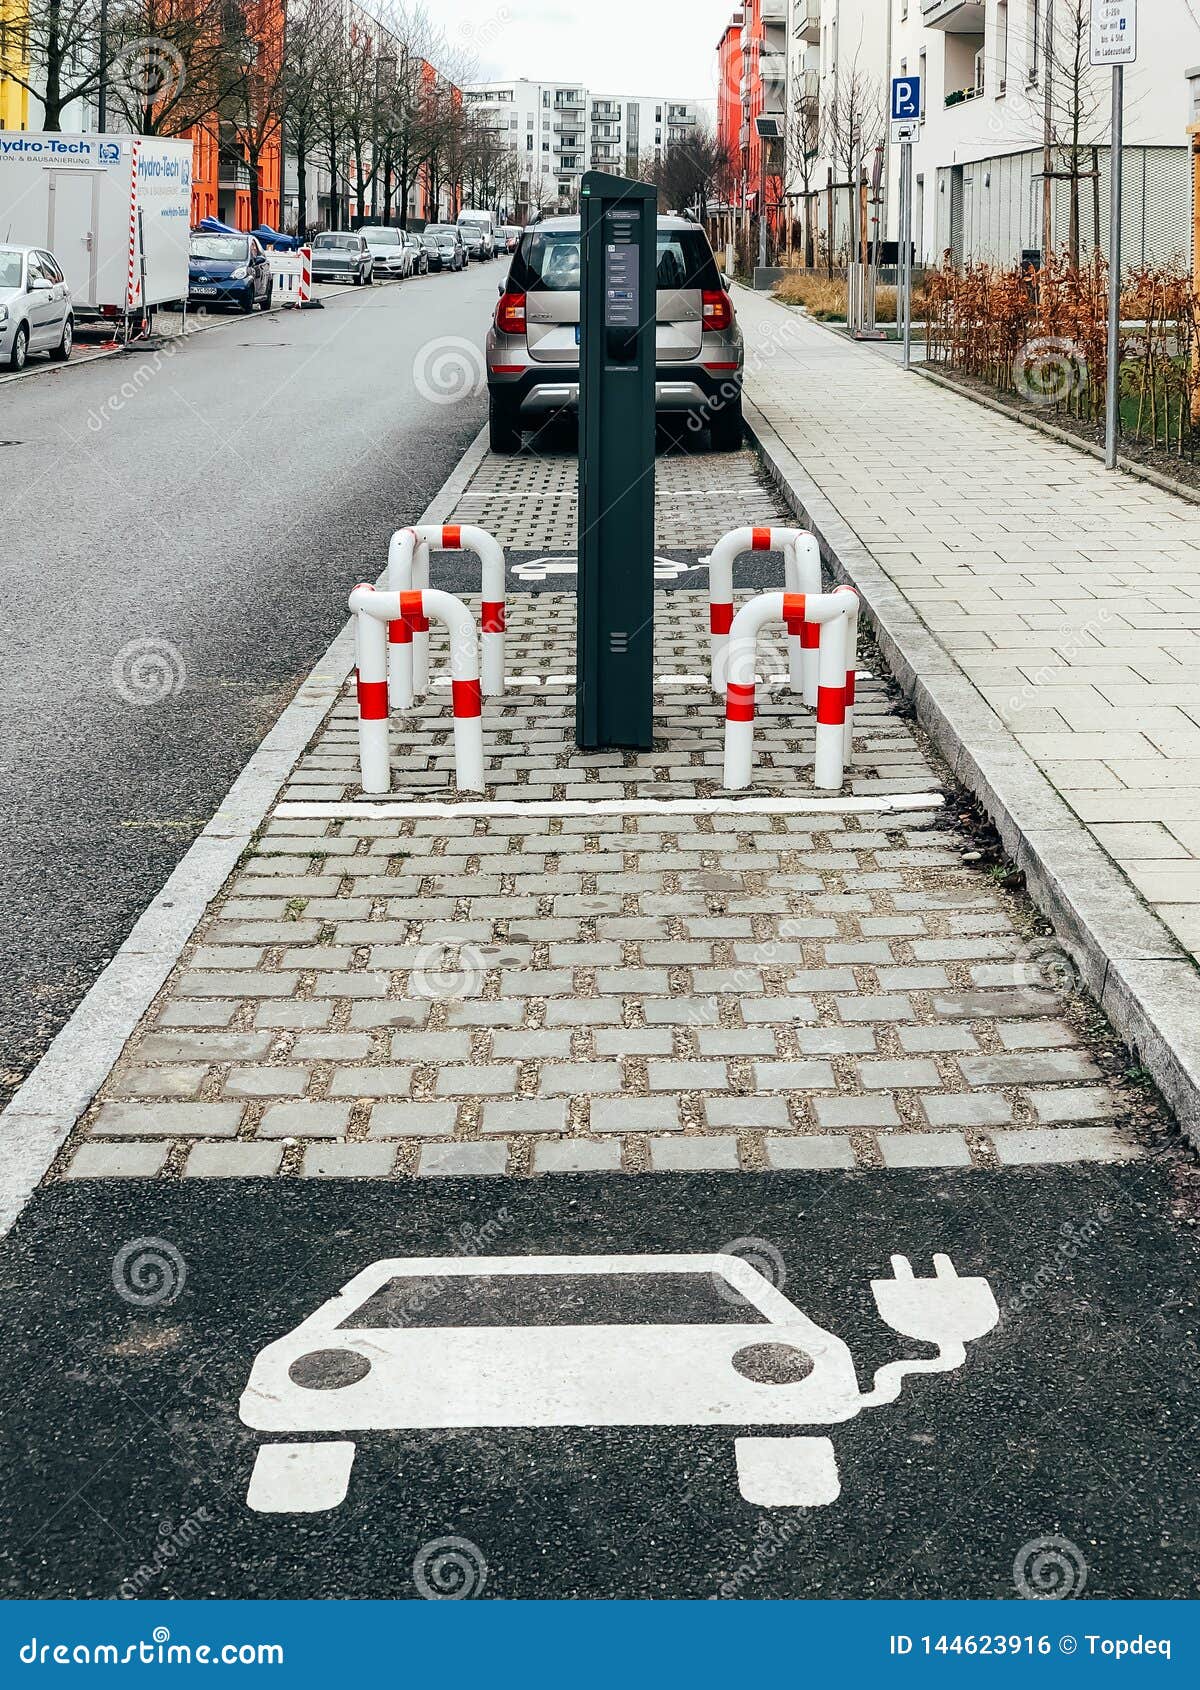 Parking for Electric Cars Charging Editorial Photo - Image of street